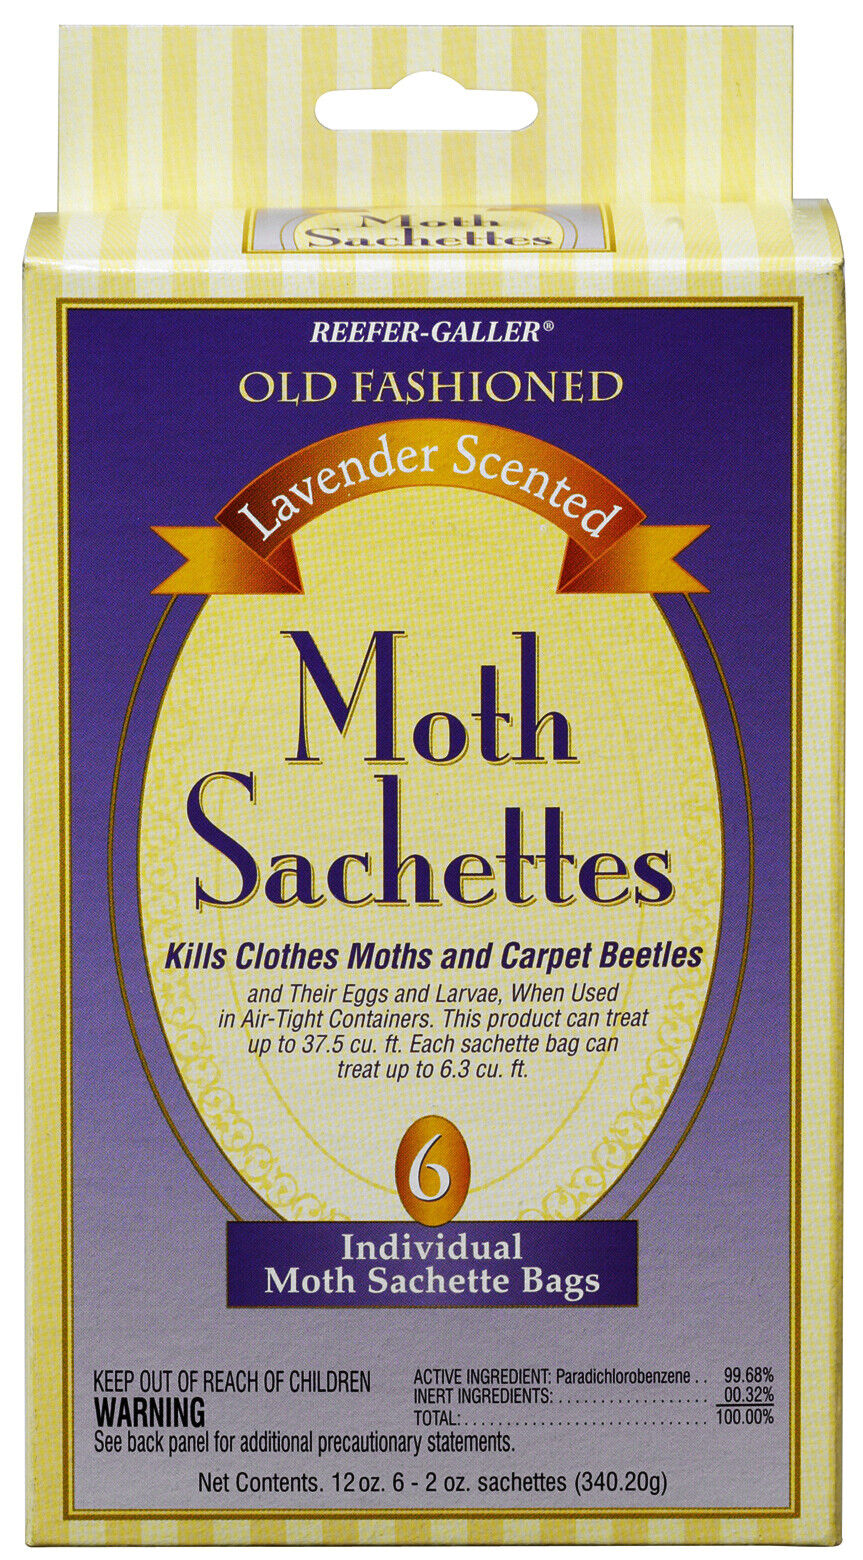 Reefer-galler Old Fashioned Lavender Scented Moth 2oz Sachette Bags - 6 Count